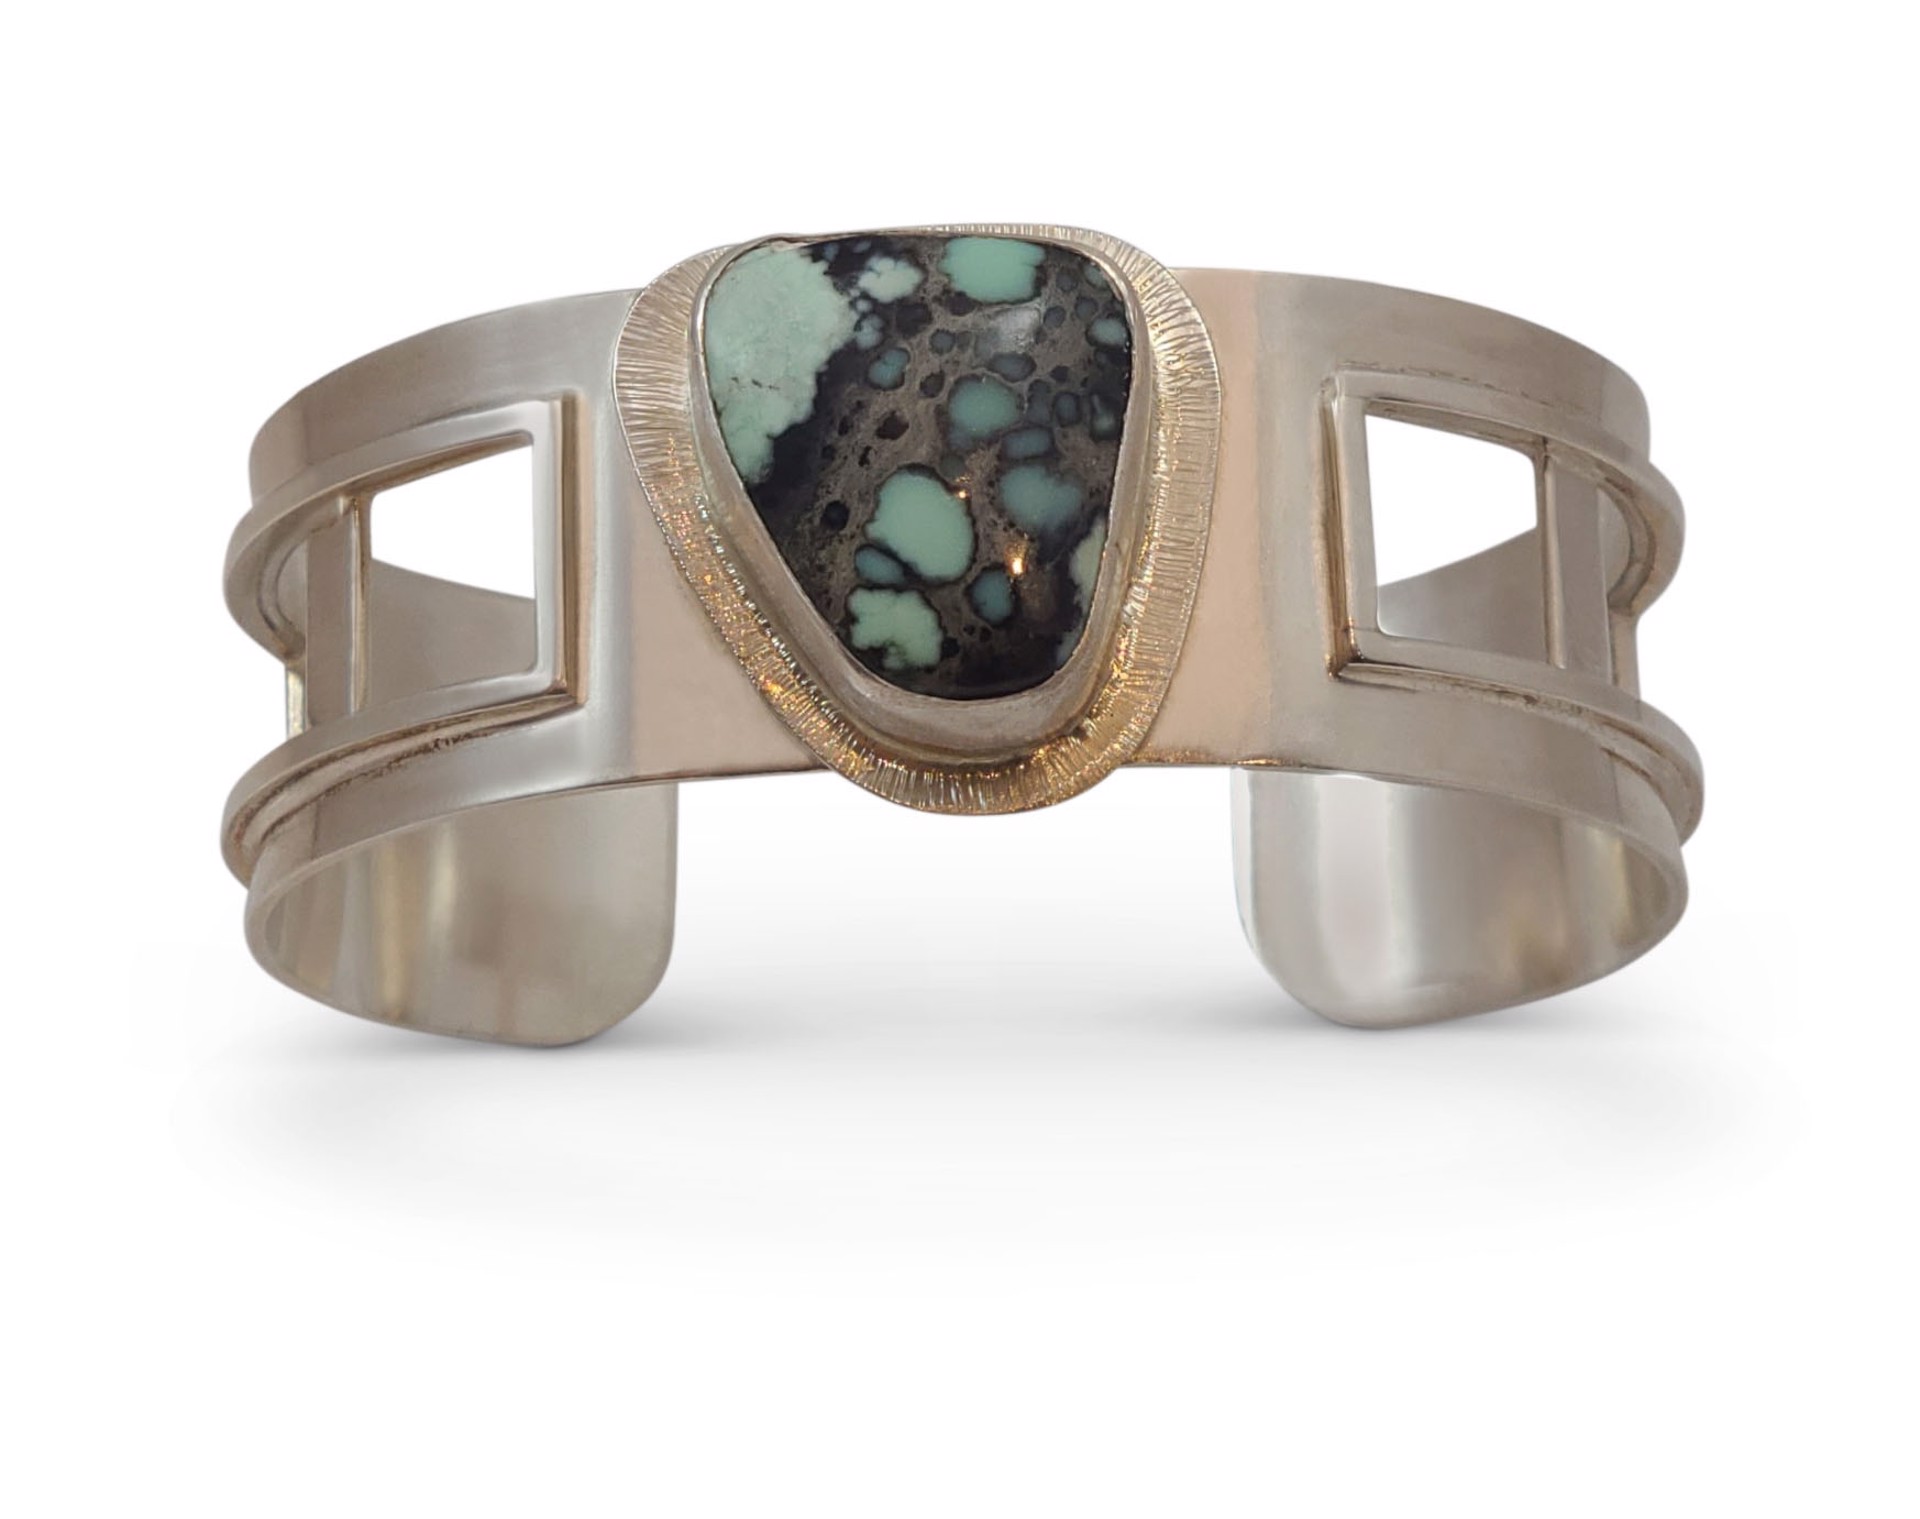 Cutout Cuff Bracelet with 25mm Kingman Turquoise by Leslie Eggers